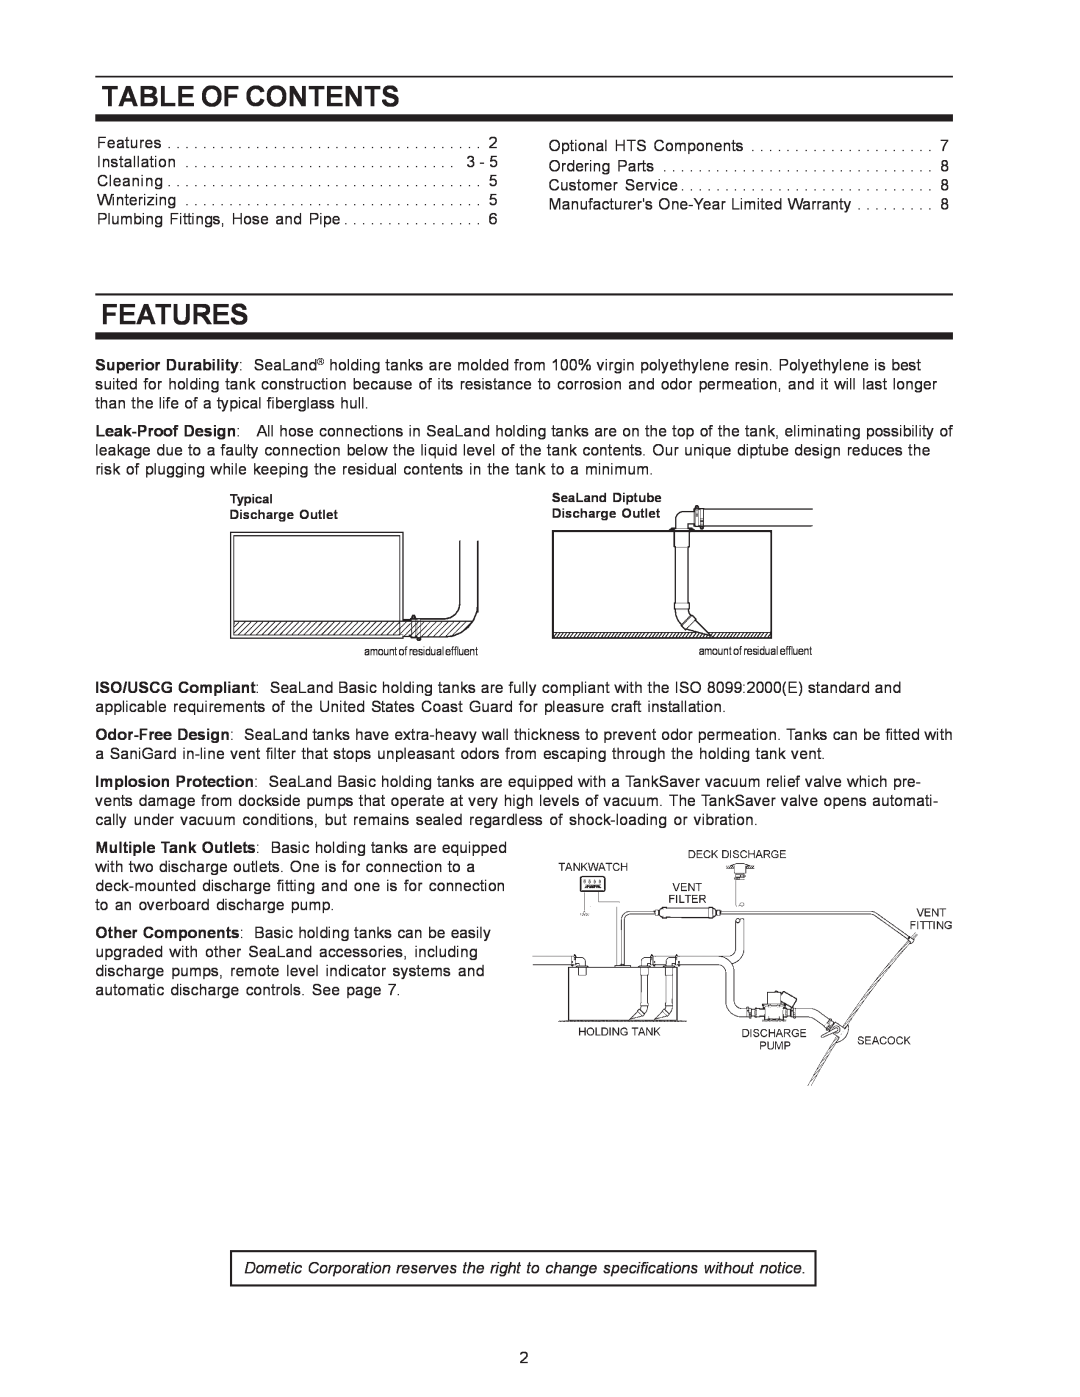 SeaLand BASIC HOLDING TANK SYSTEM owner manual Table Of Contents, Features 